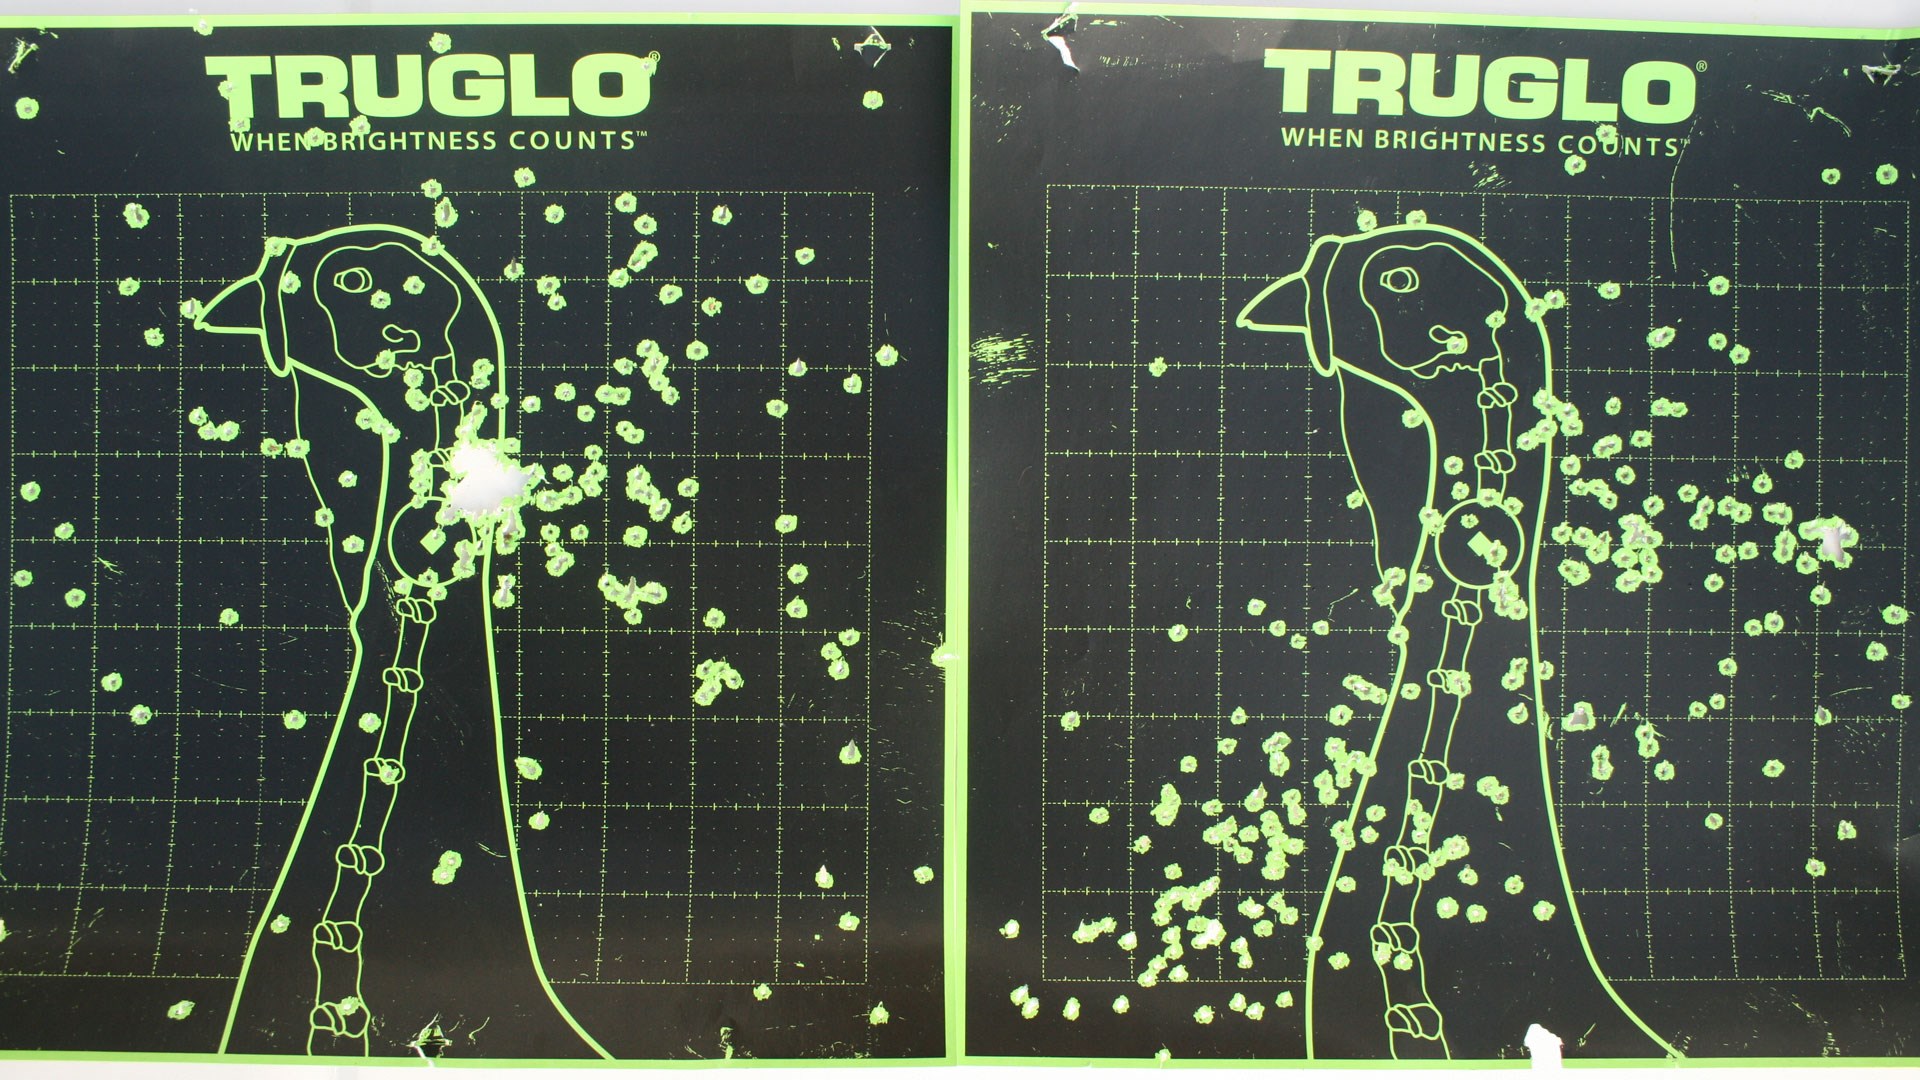 Truglo example patterns